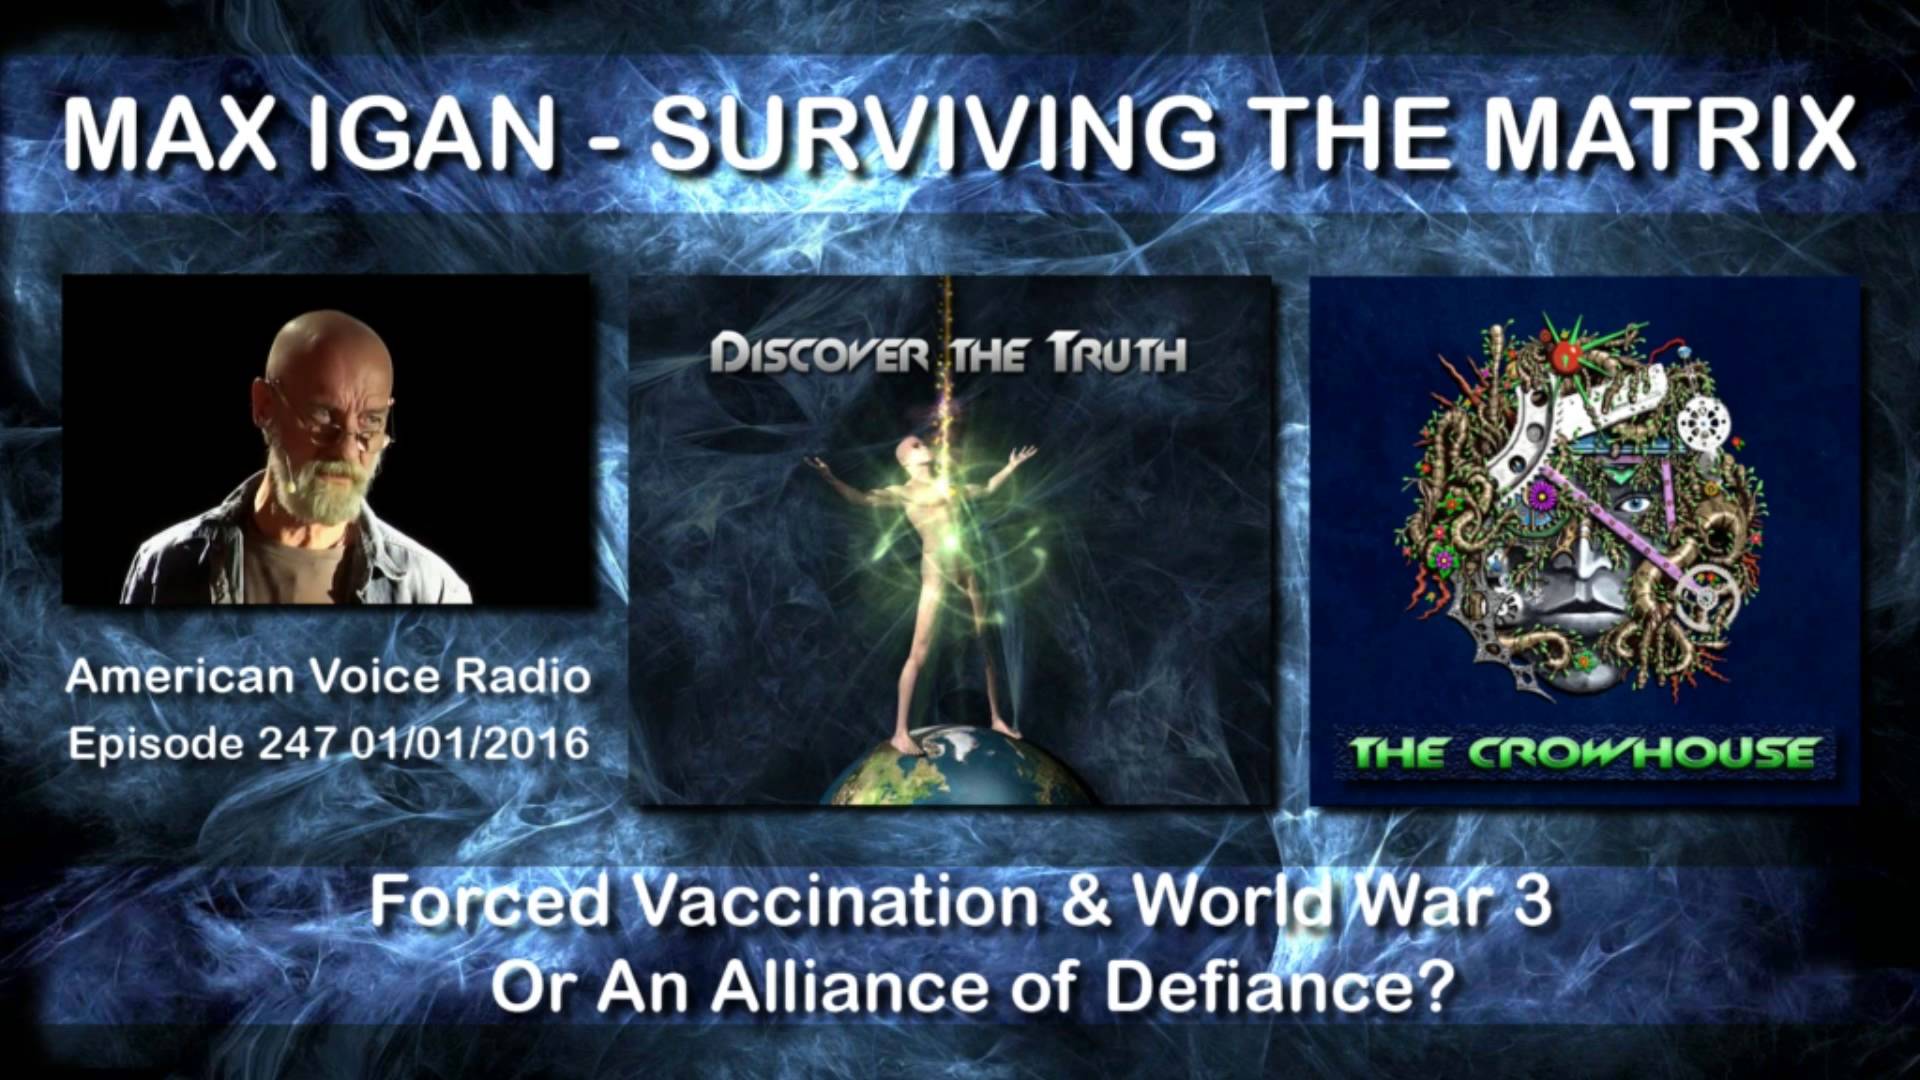 Max Igan – Forced Vaccination & World War 3 Or An Alliance of Defiance? (full show) Jan 1 2016